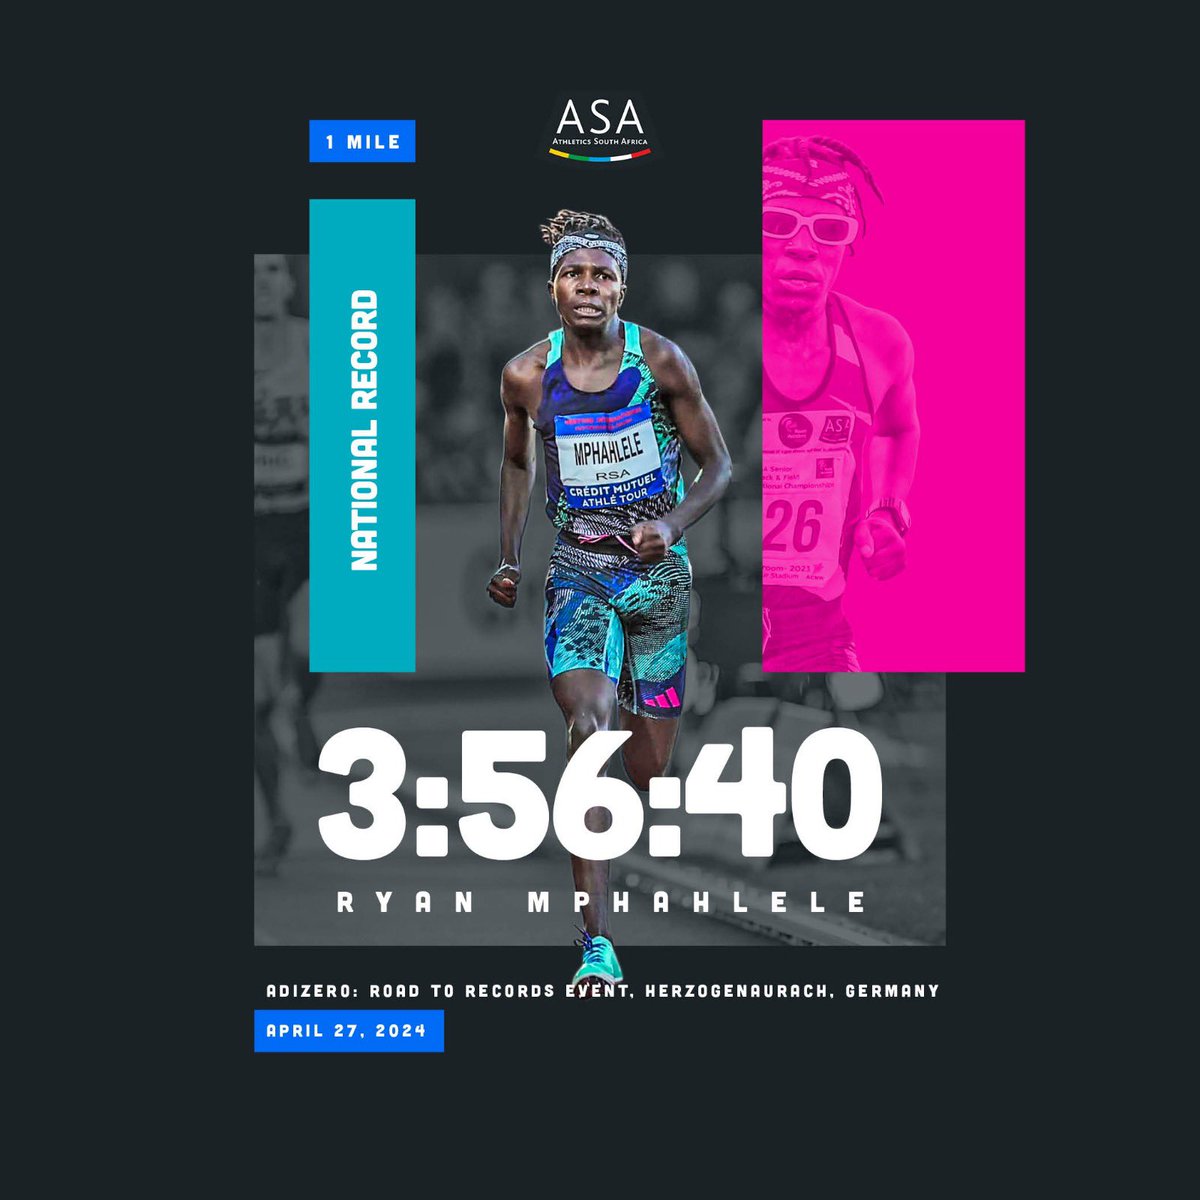 Ryan Mphahlele just keeps getting faster! Awesome effort from him in Germany over the weekend, breaking his own national record over the mile distance on the road.